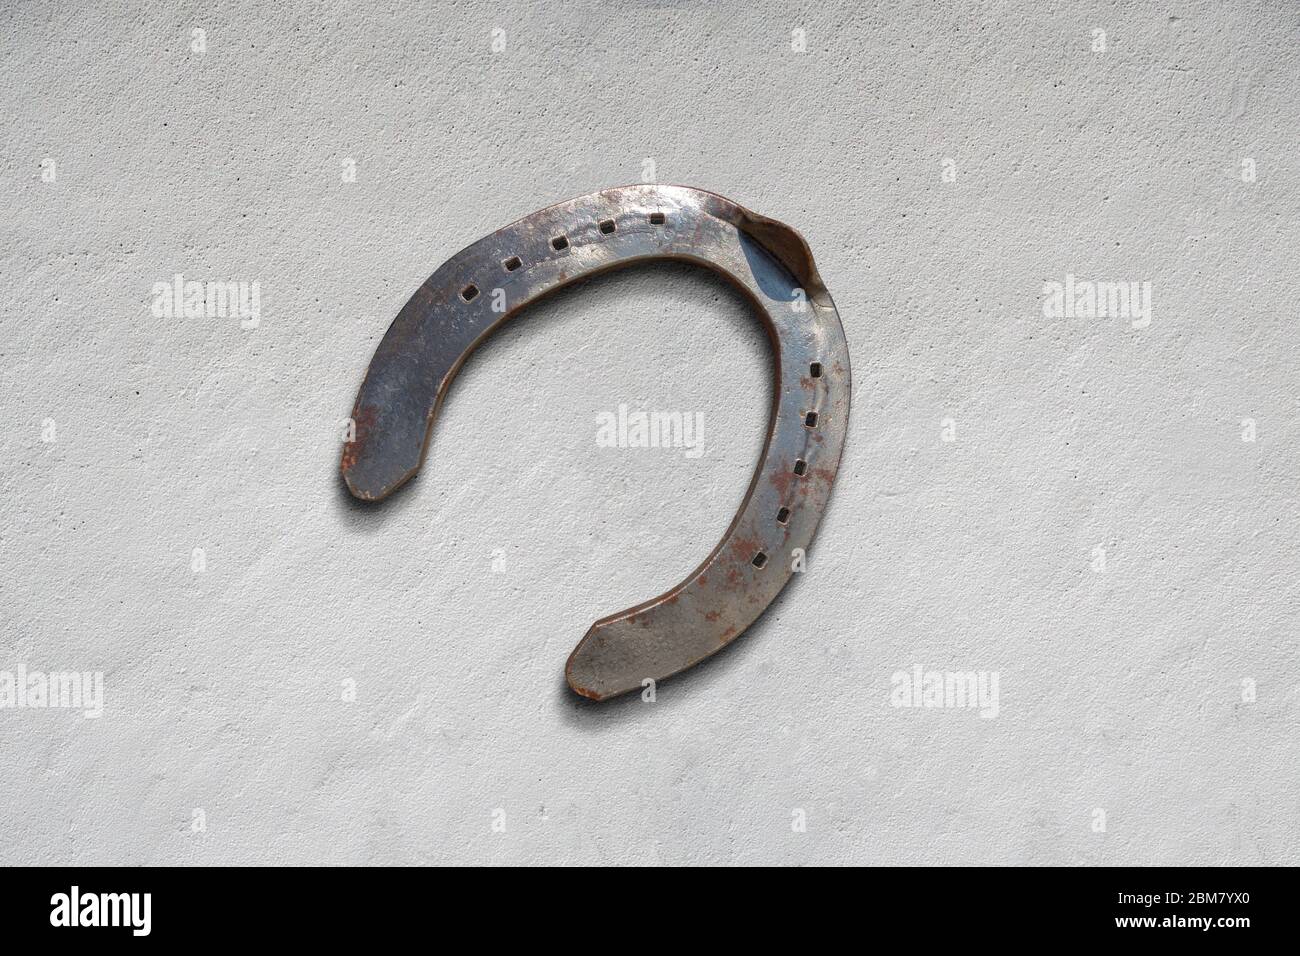 meatl horseshoe for luck and wellness on a cemete surface Stock Photo